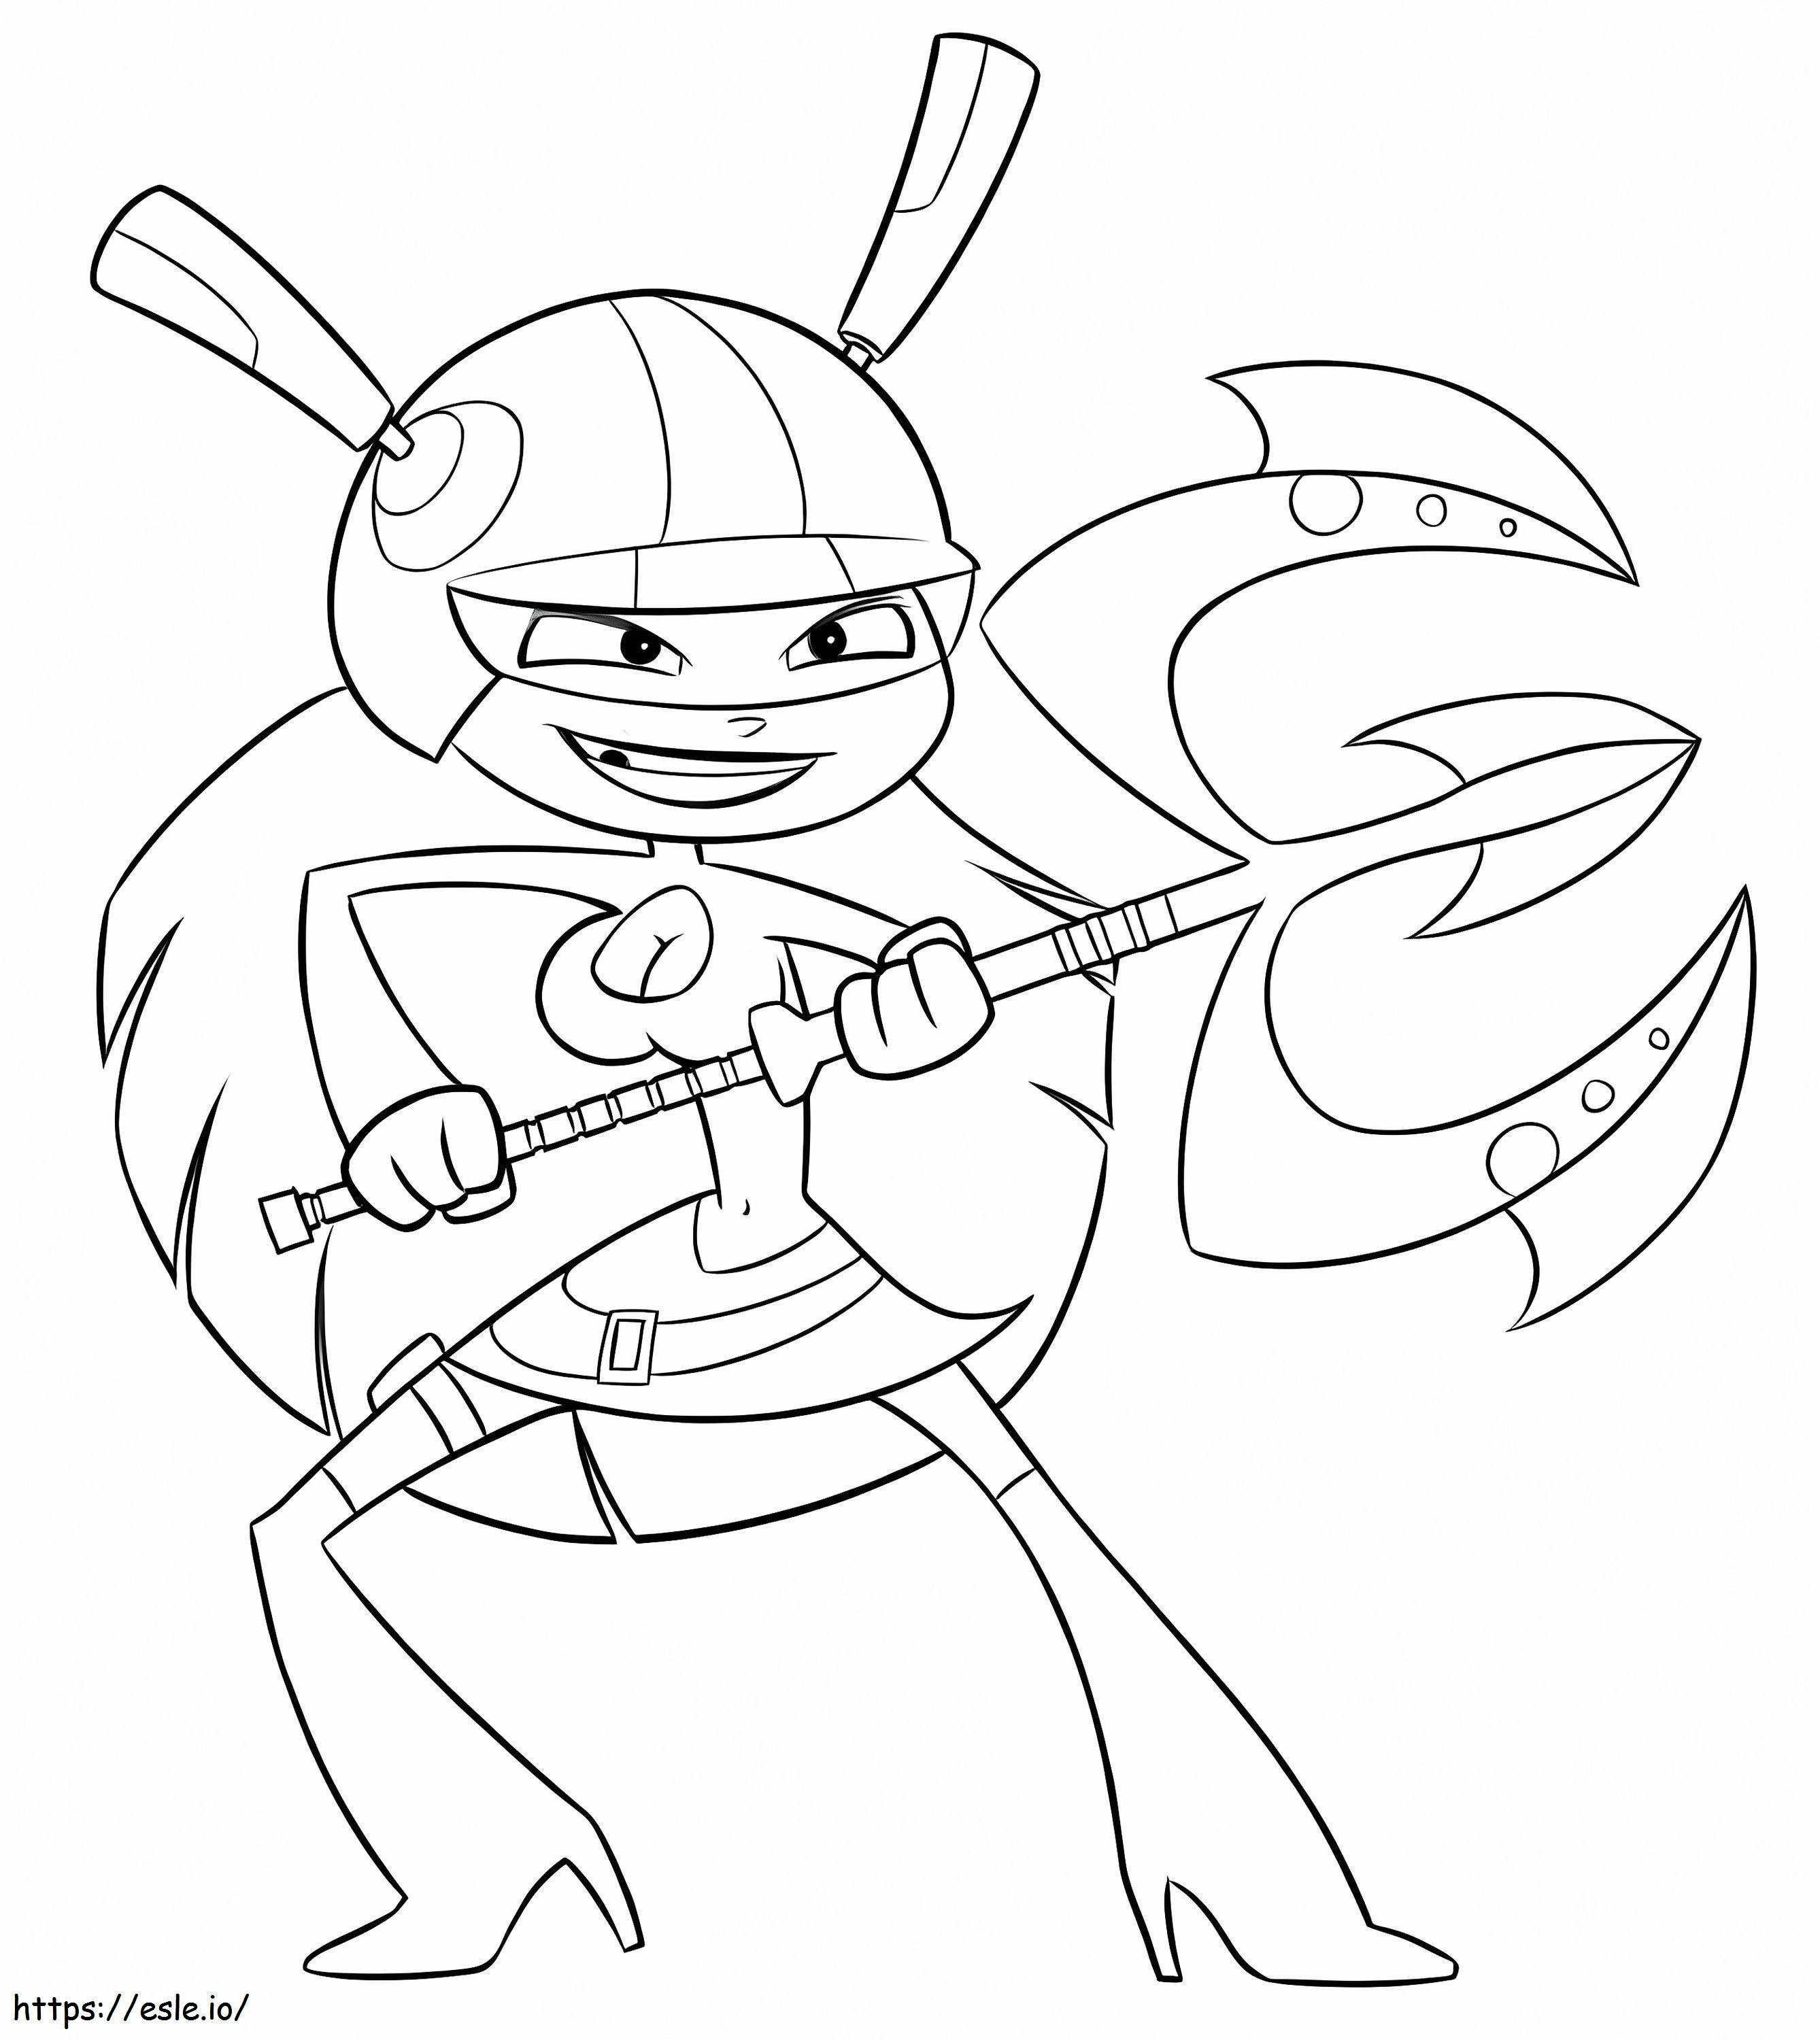 Emma From Rayman coloring page